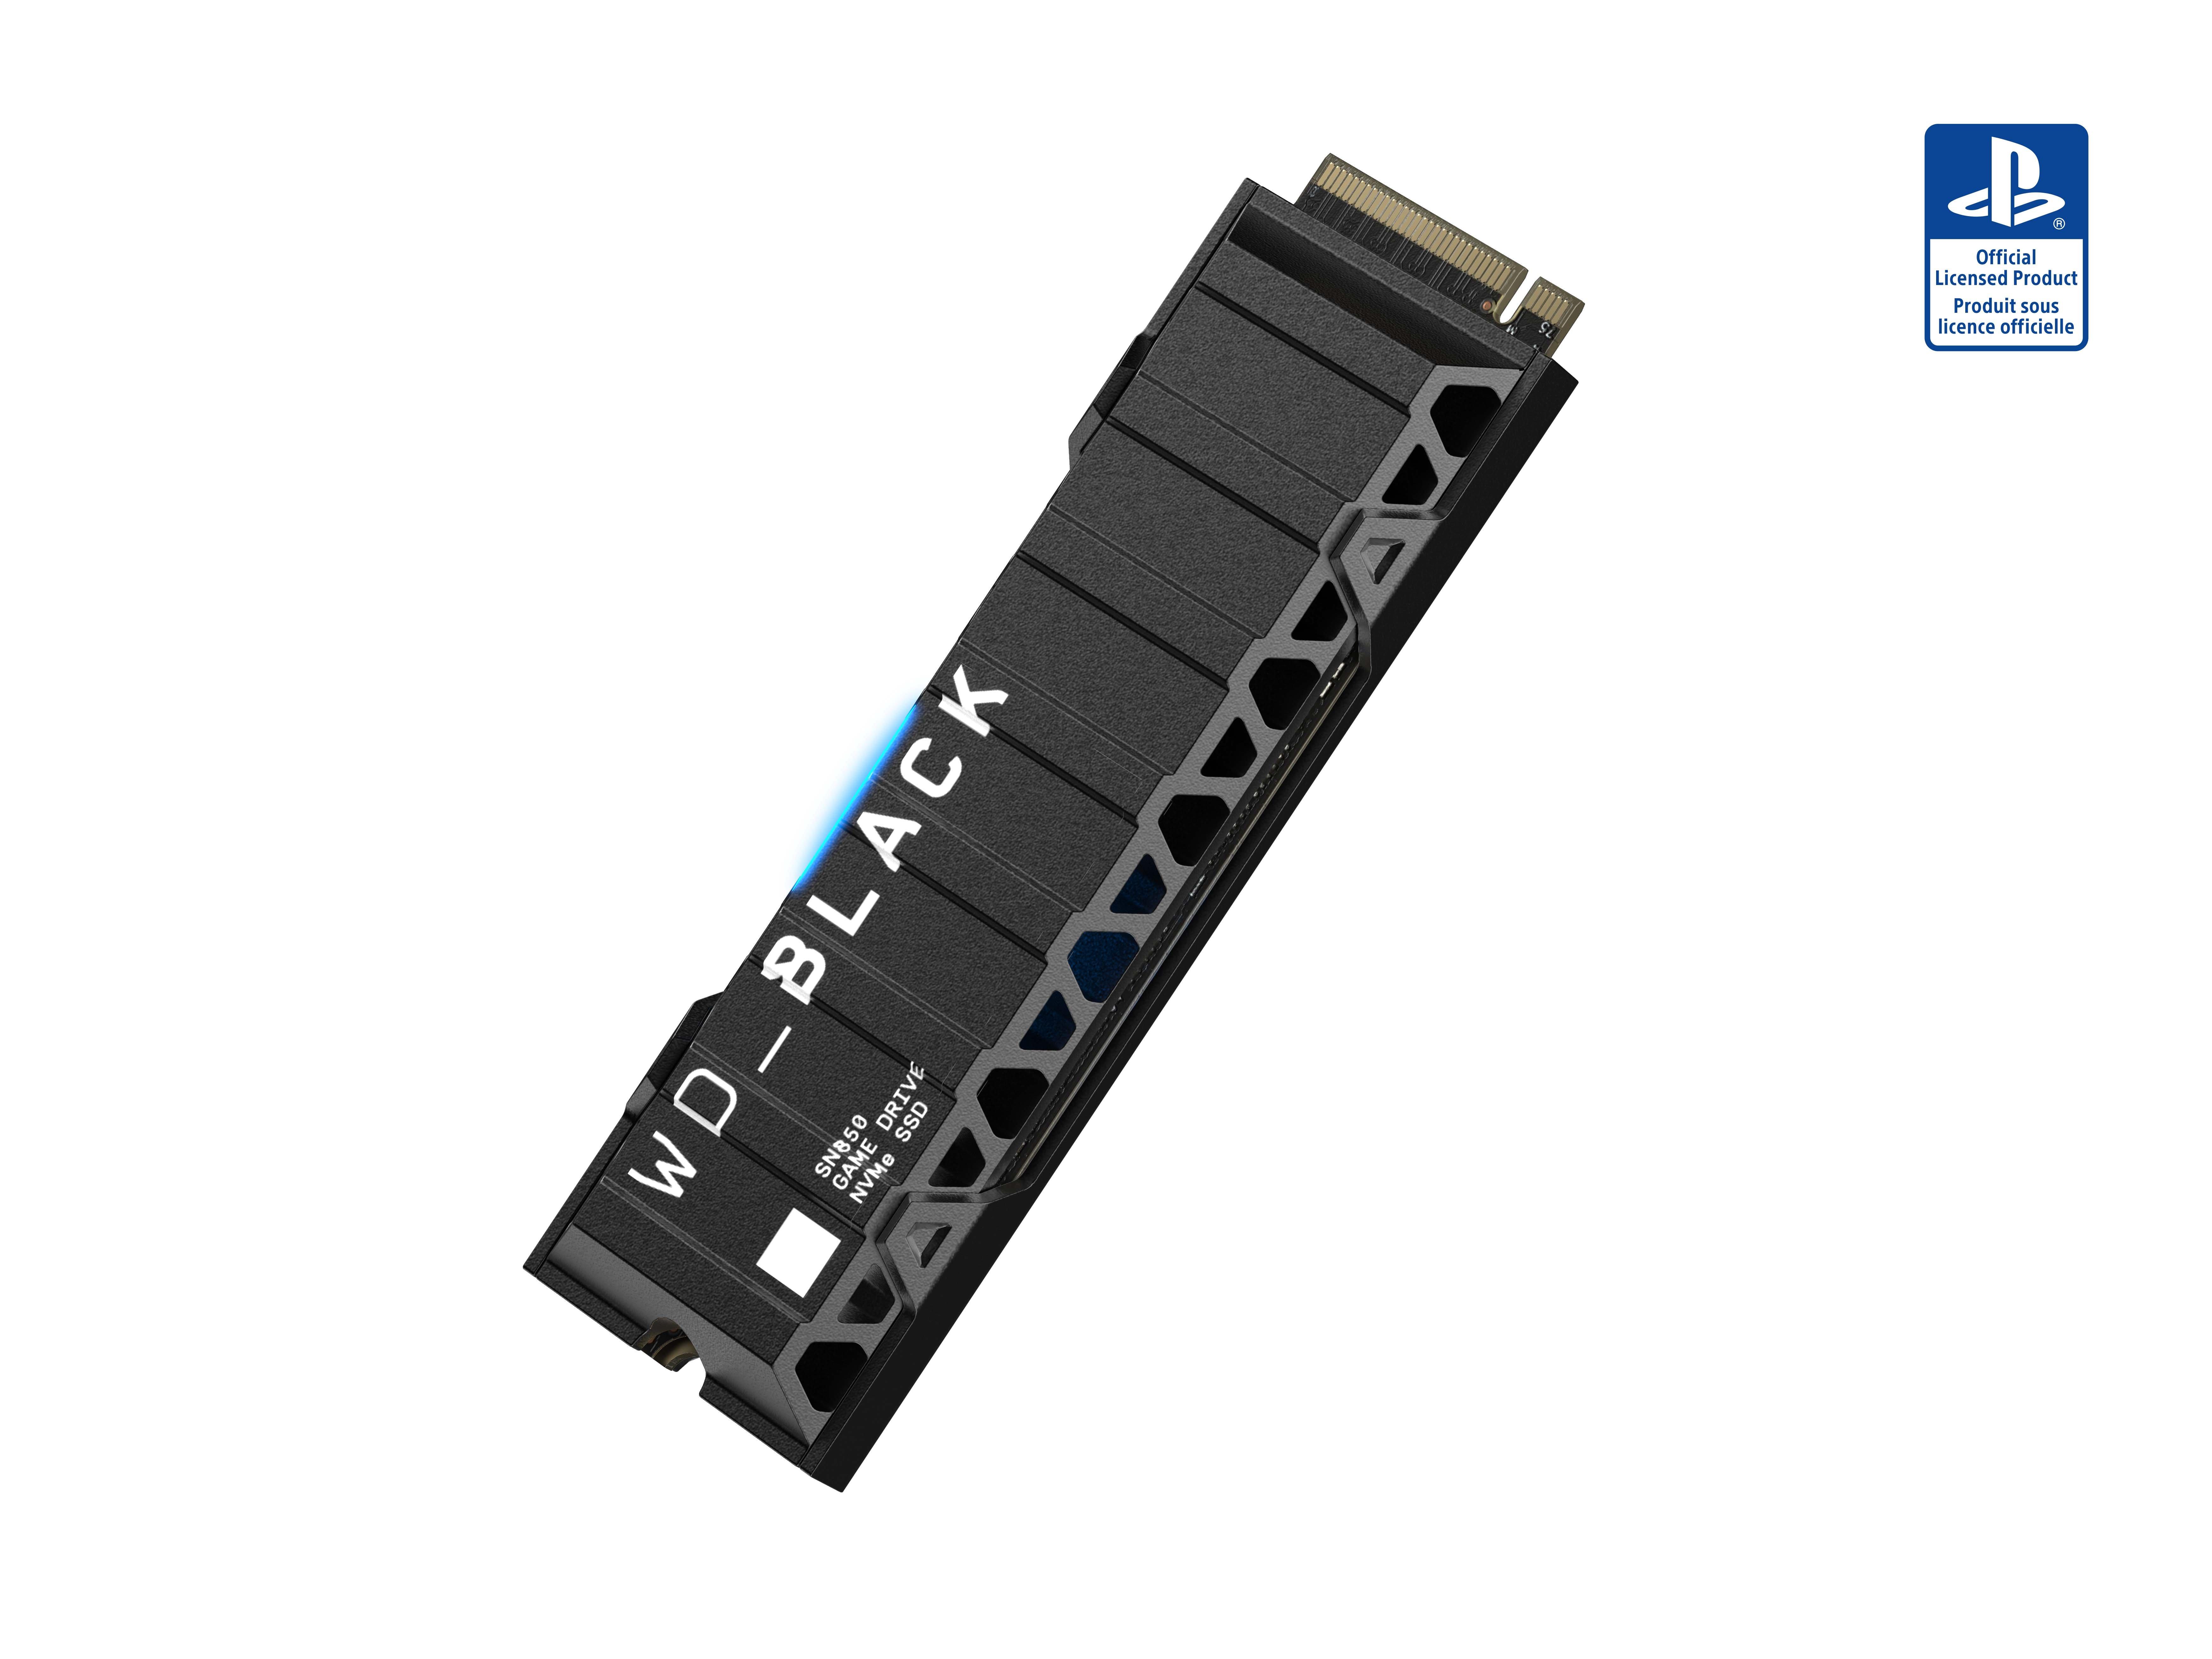 GameStop 1TB SSD with Heatsink PCIe Gen4 NVMe M.2 High-Performance Gaming  Solid State Drive for PlayStation 5 and PC